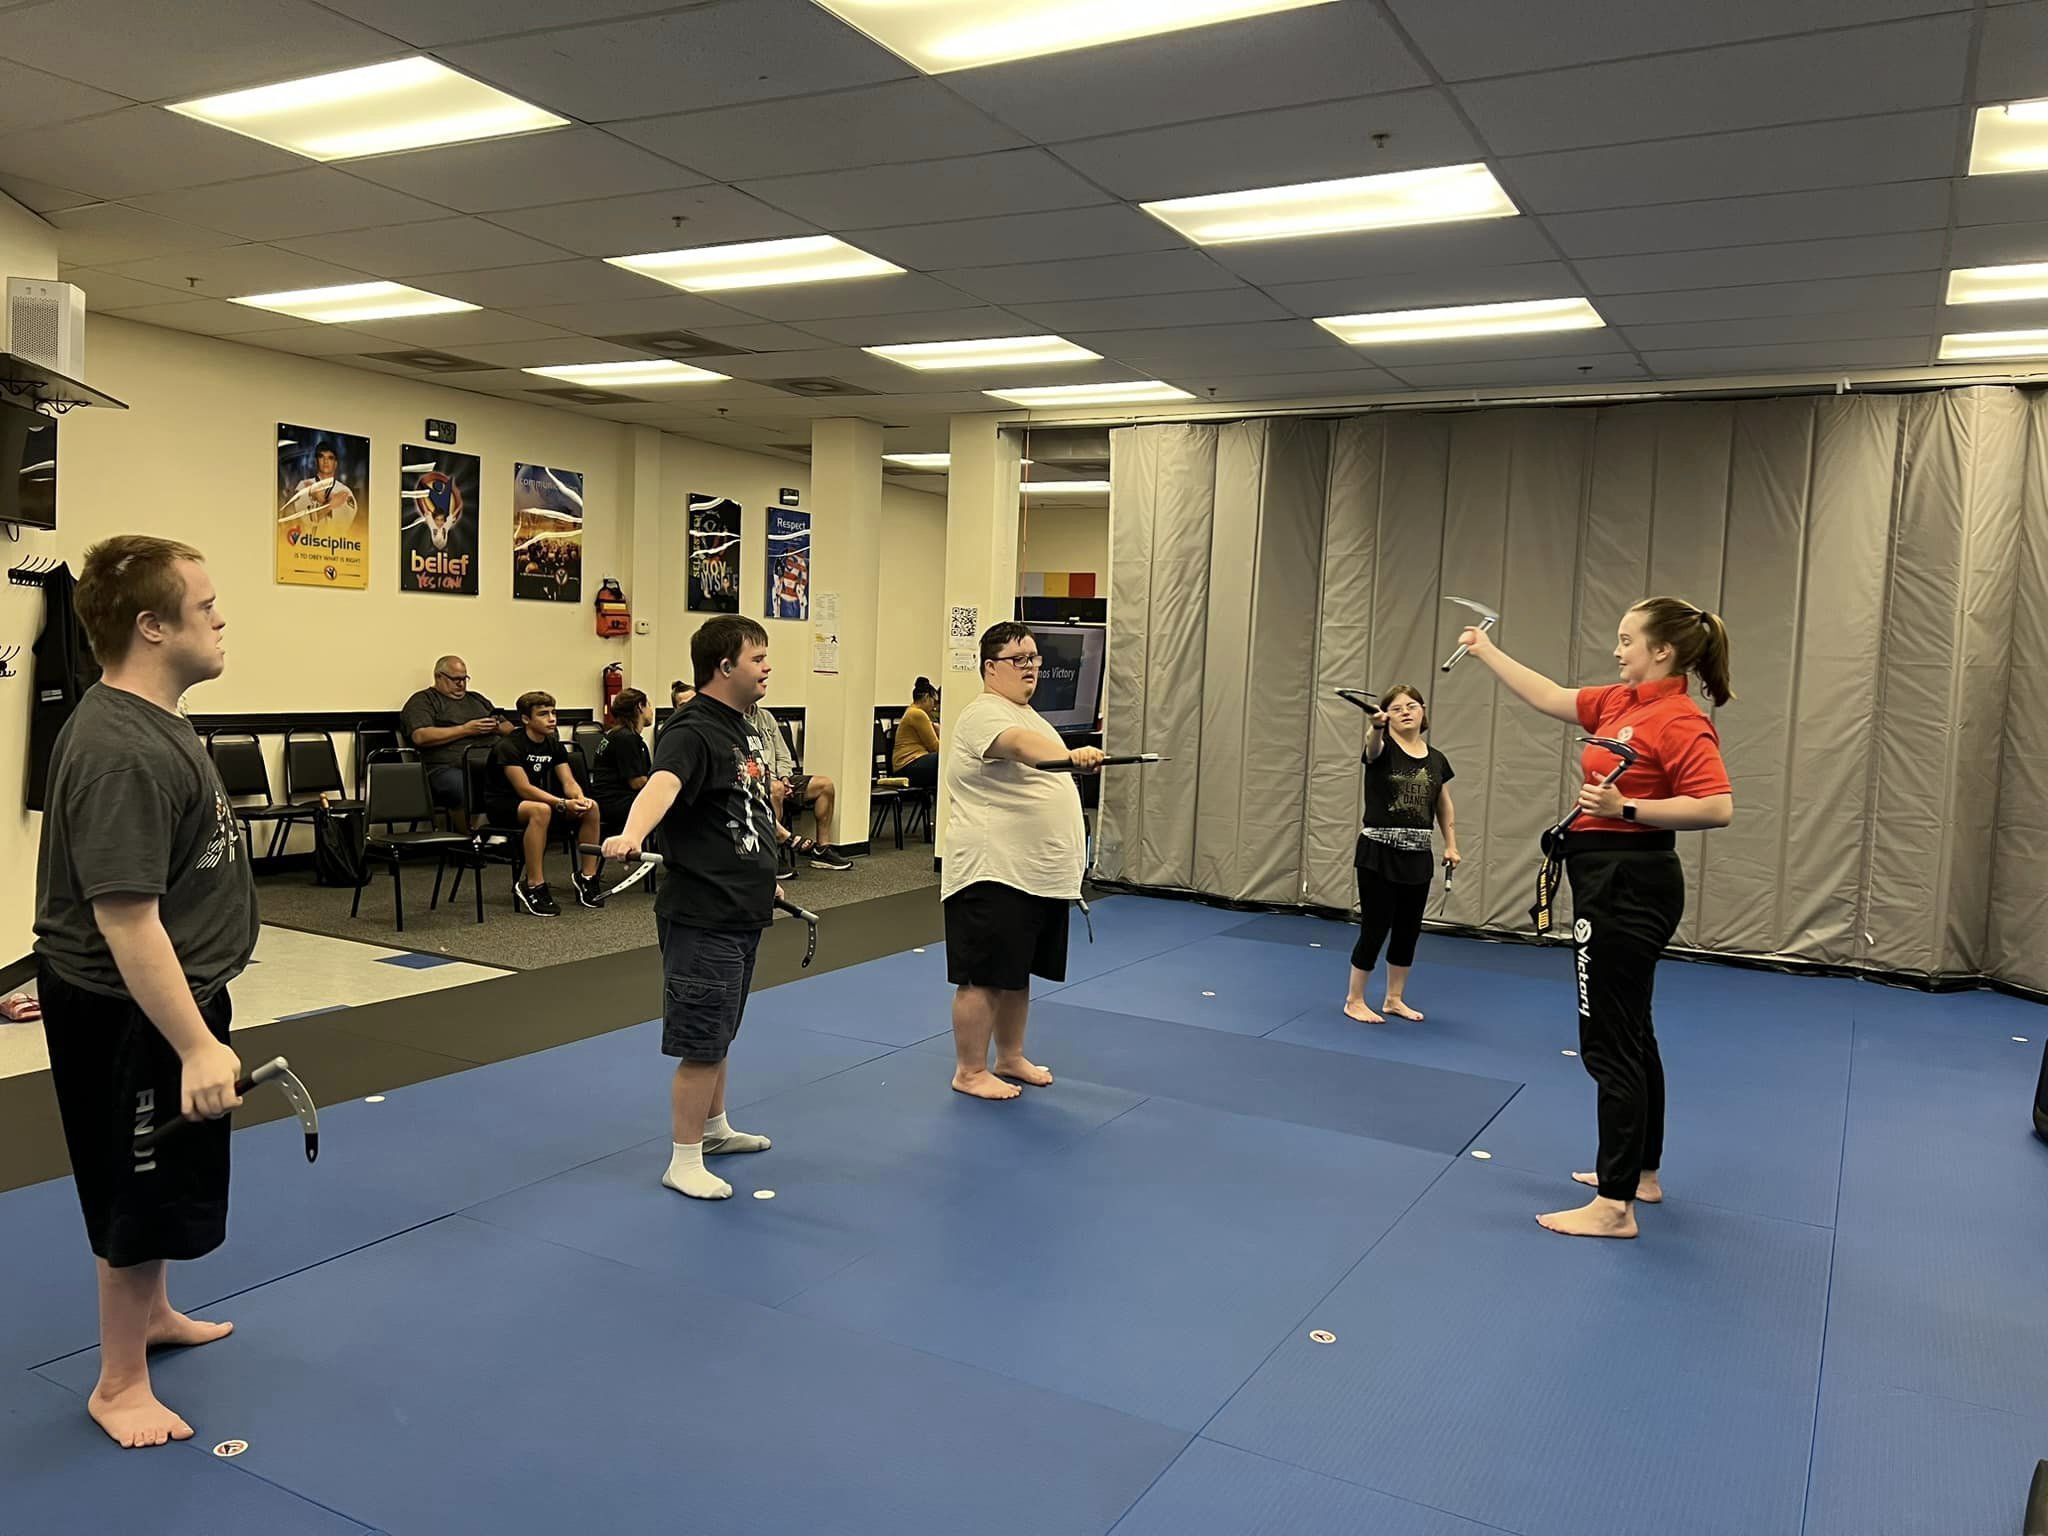 A karate instructor demonstrates a move for a group of karate class participants. The participants are adolescents and young adults with Down syndrome.